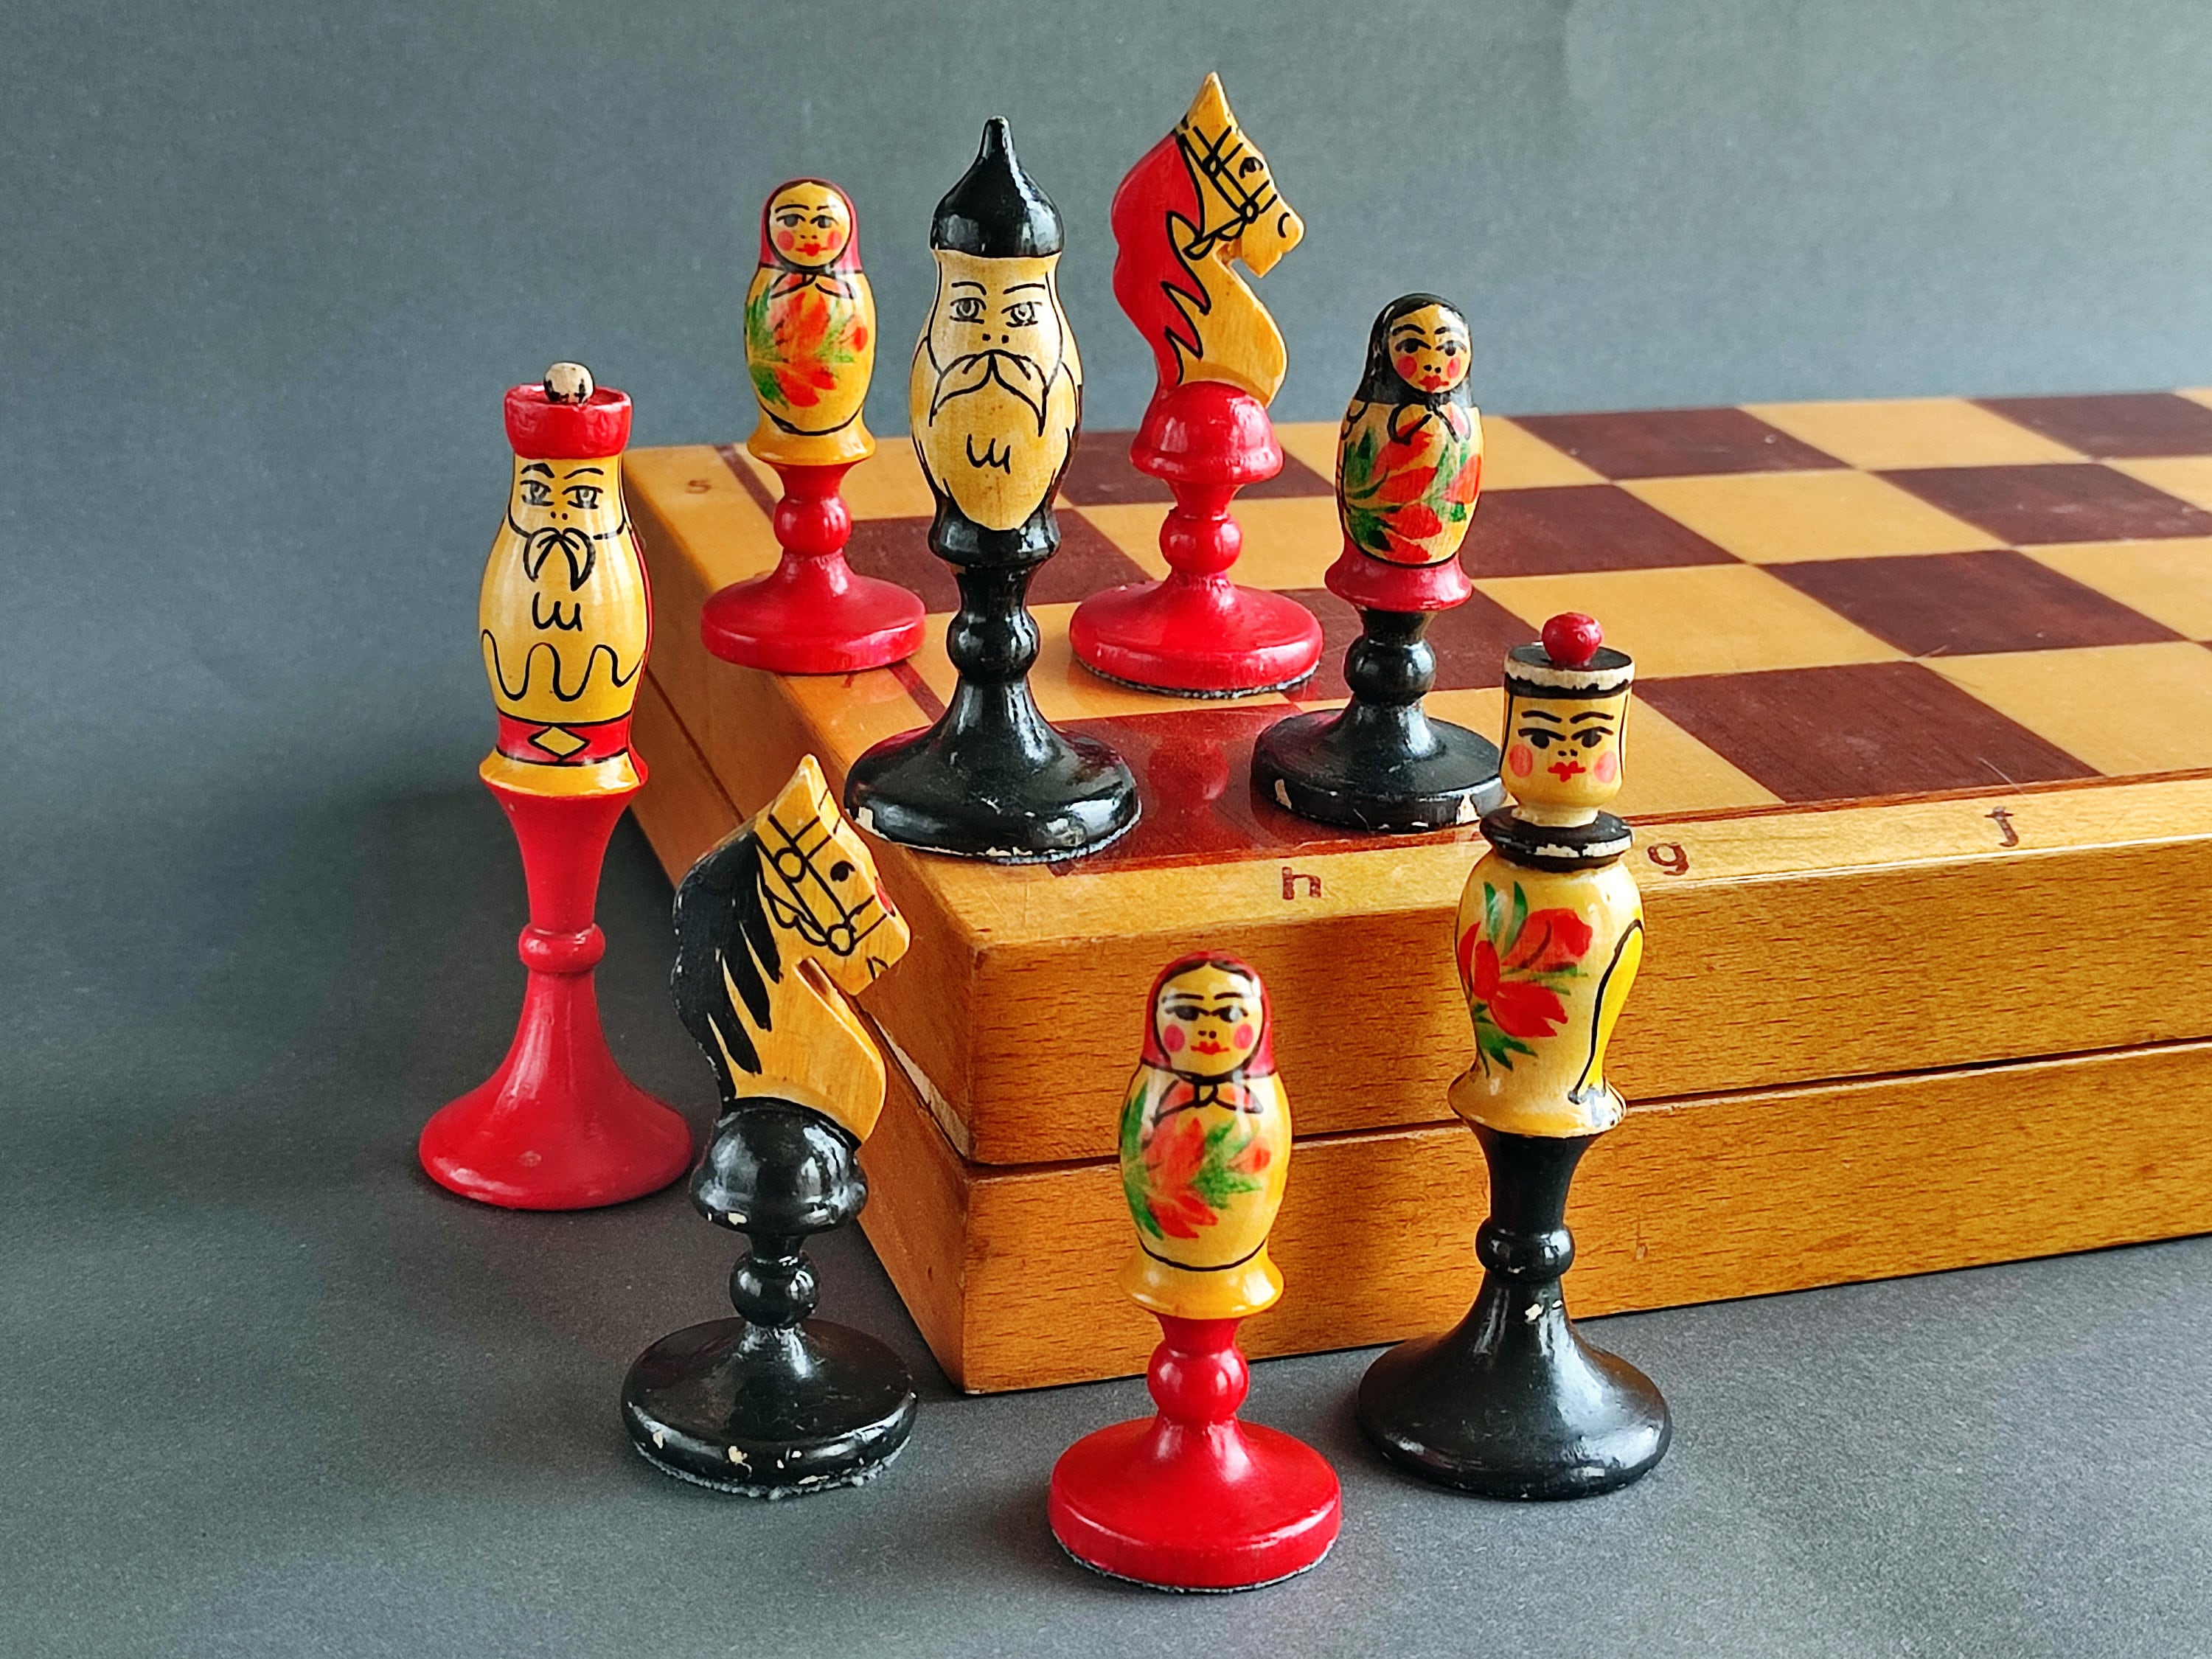 SALE Ultra Rare Vintage GUCCI Iconic Game Set Checkers Chess -  UK